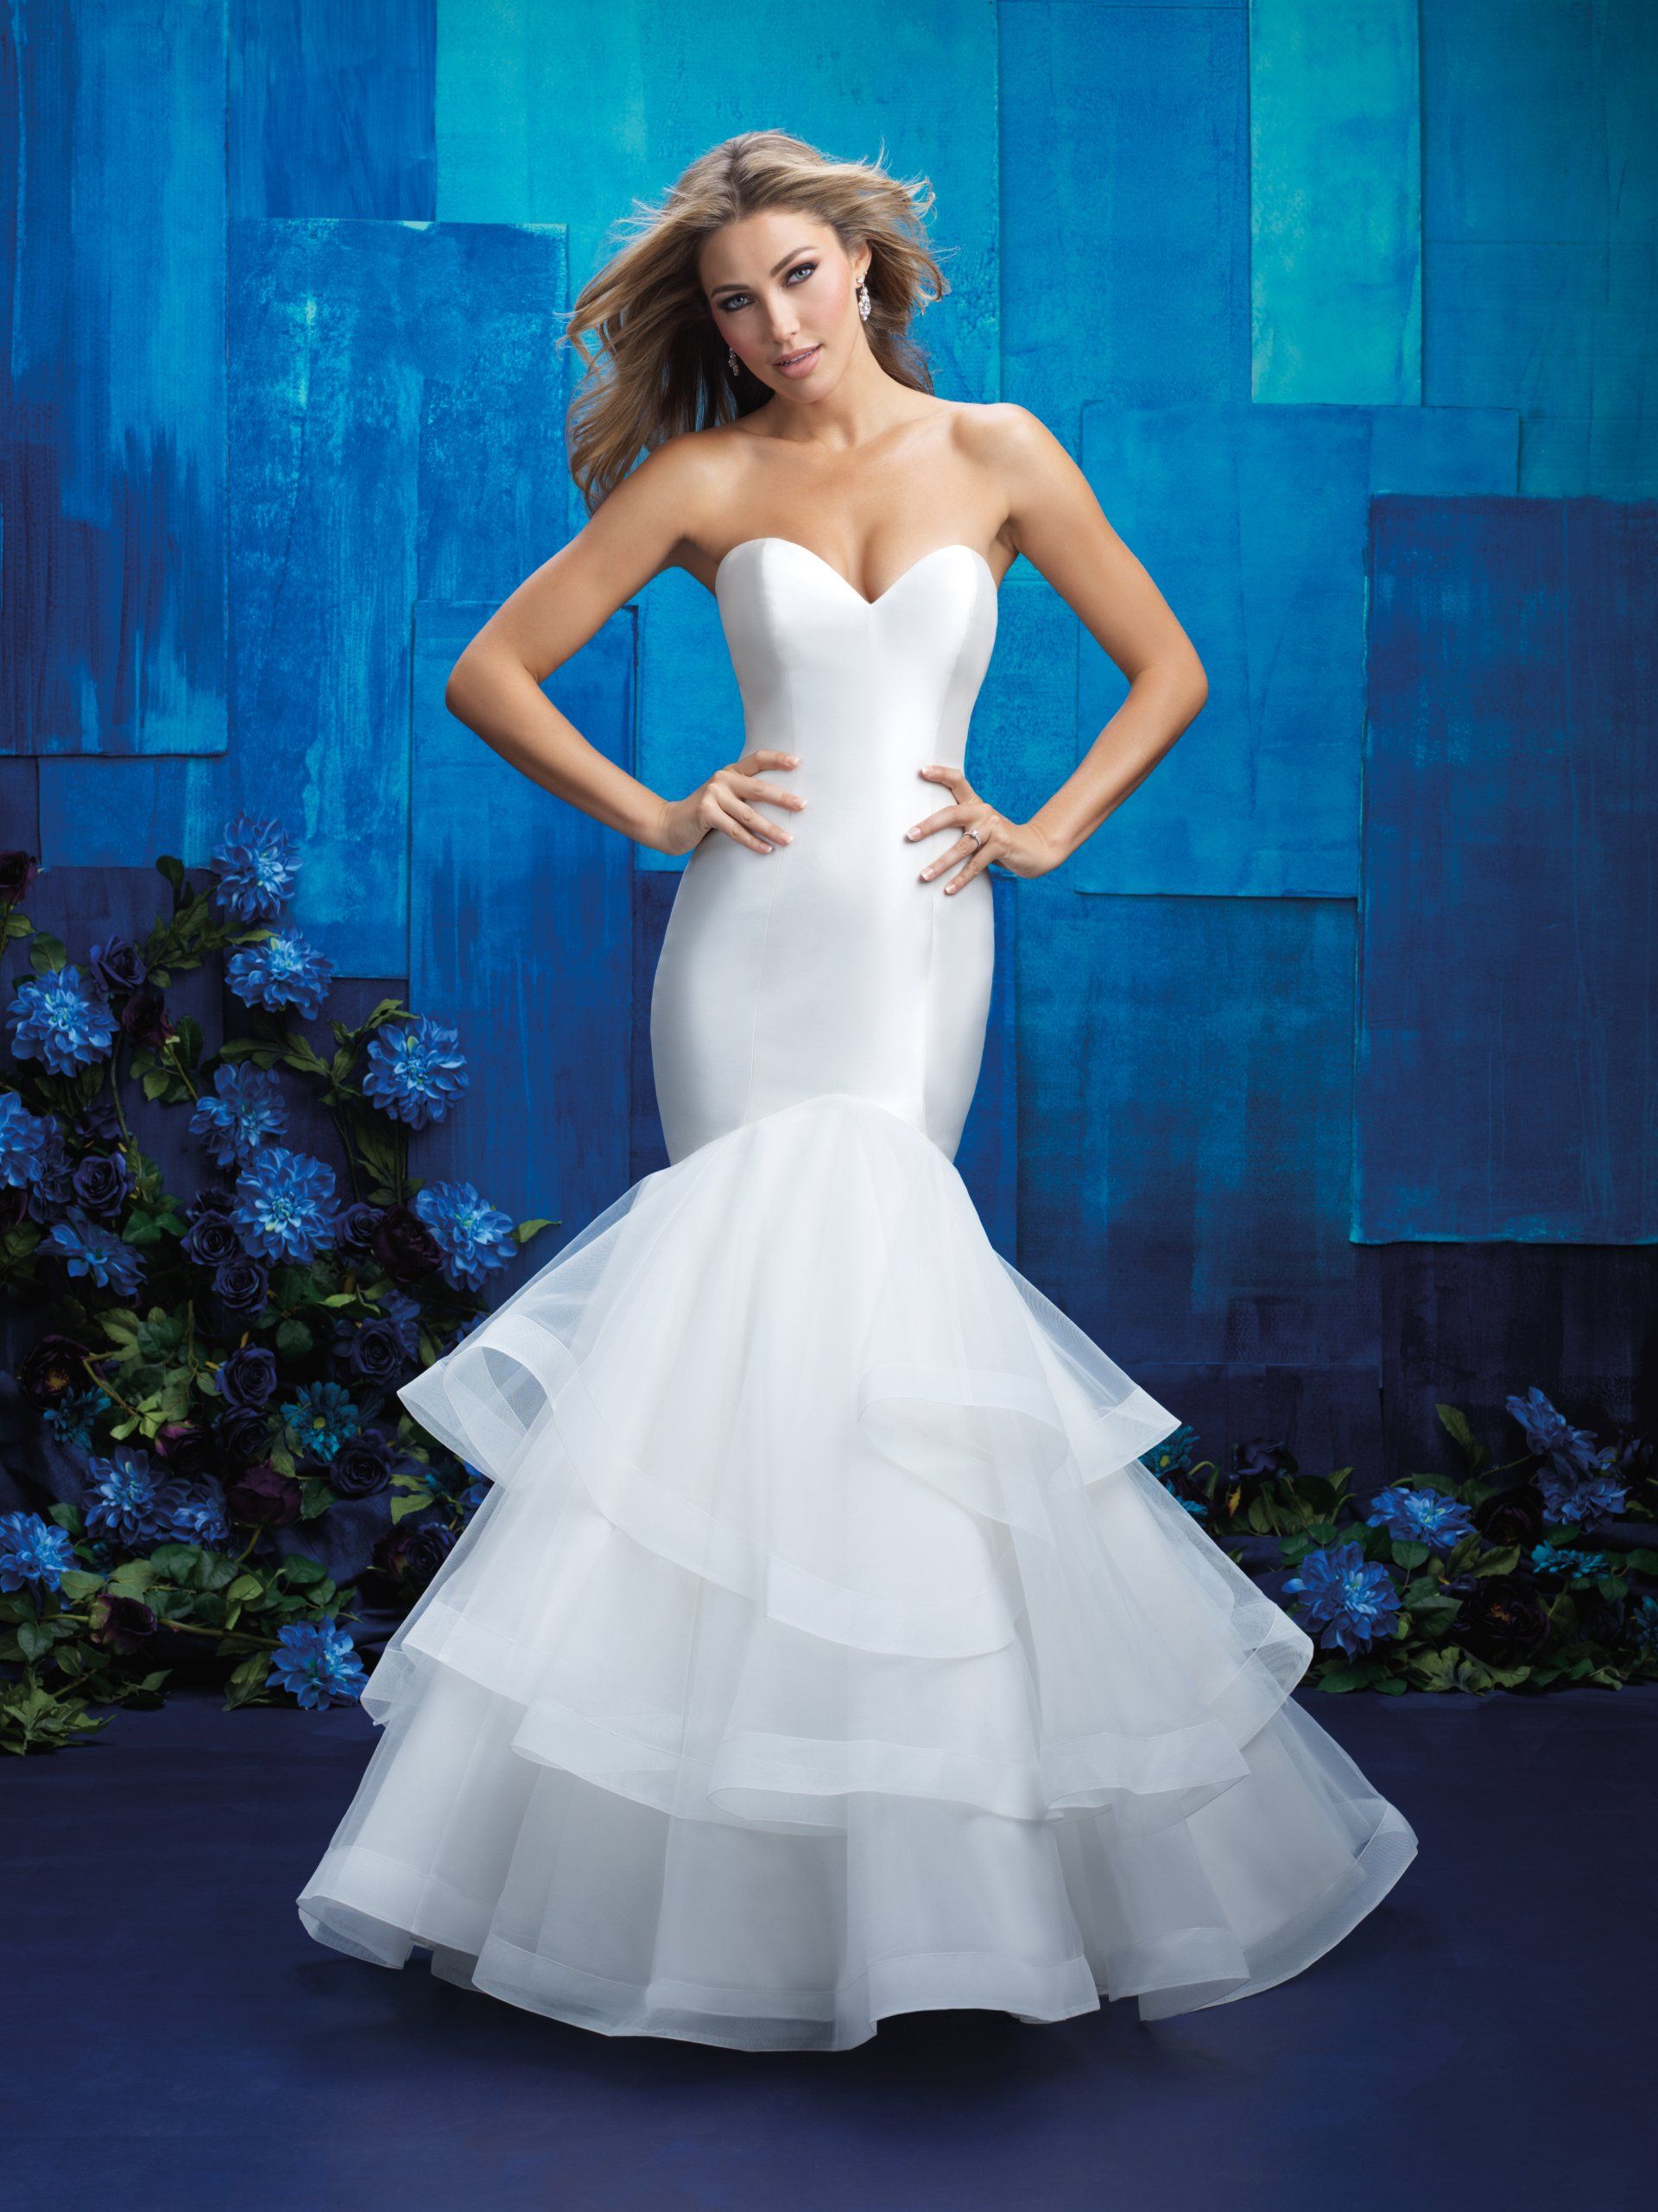 Contact us for a lace fit and flare bridal gown with sweetheart neckline